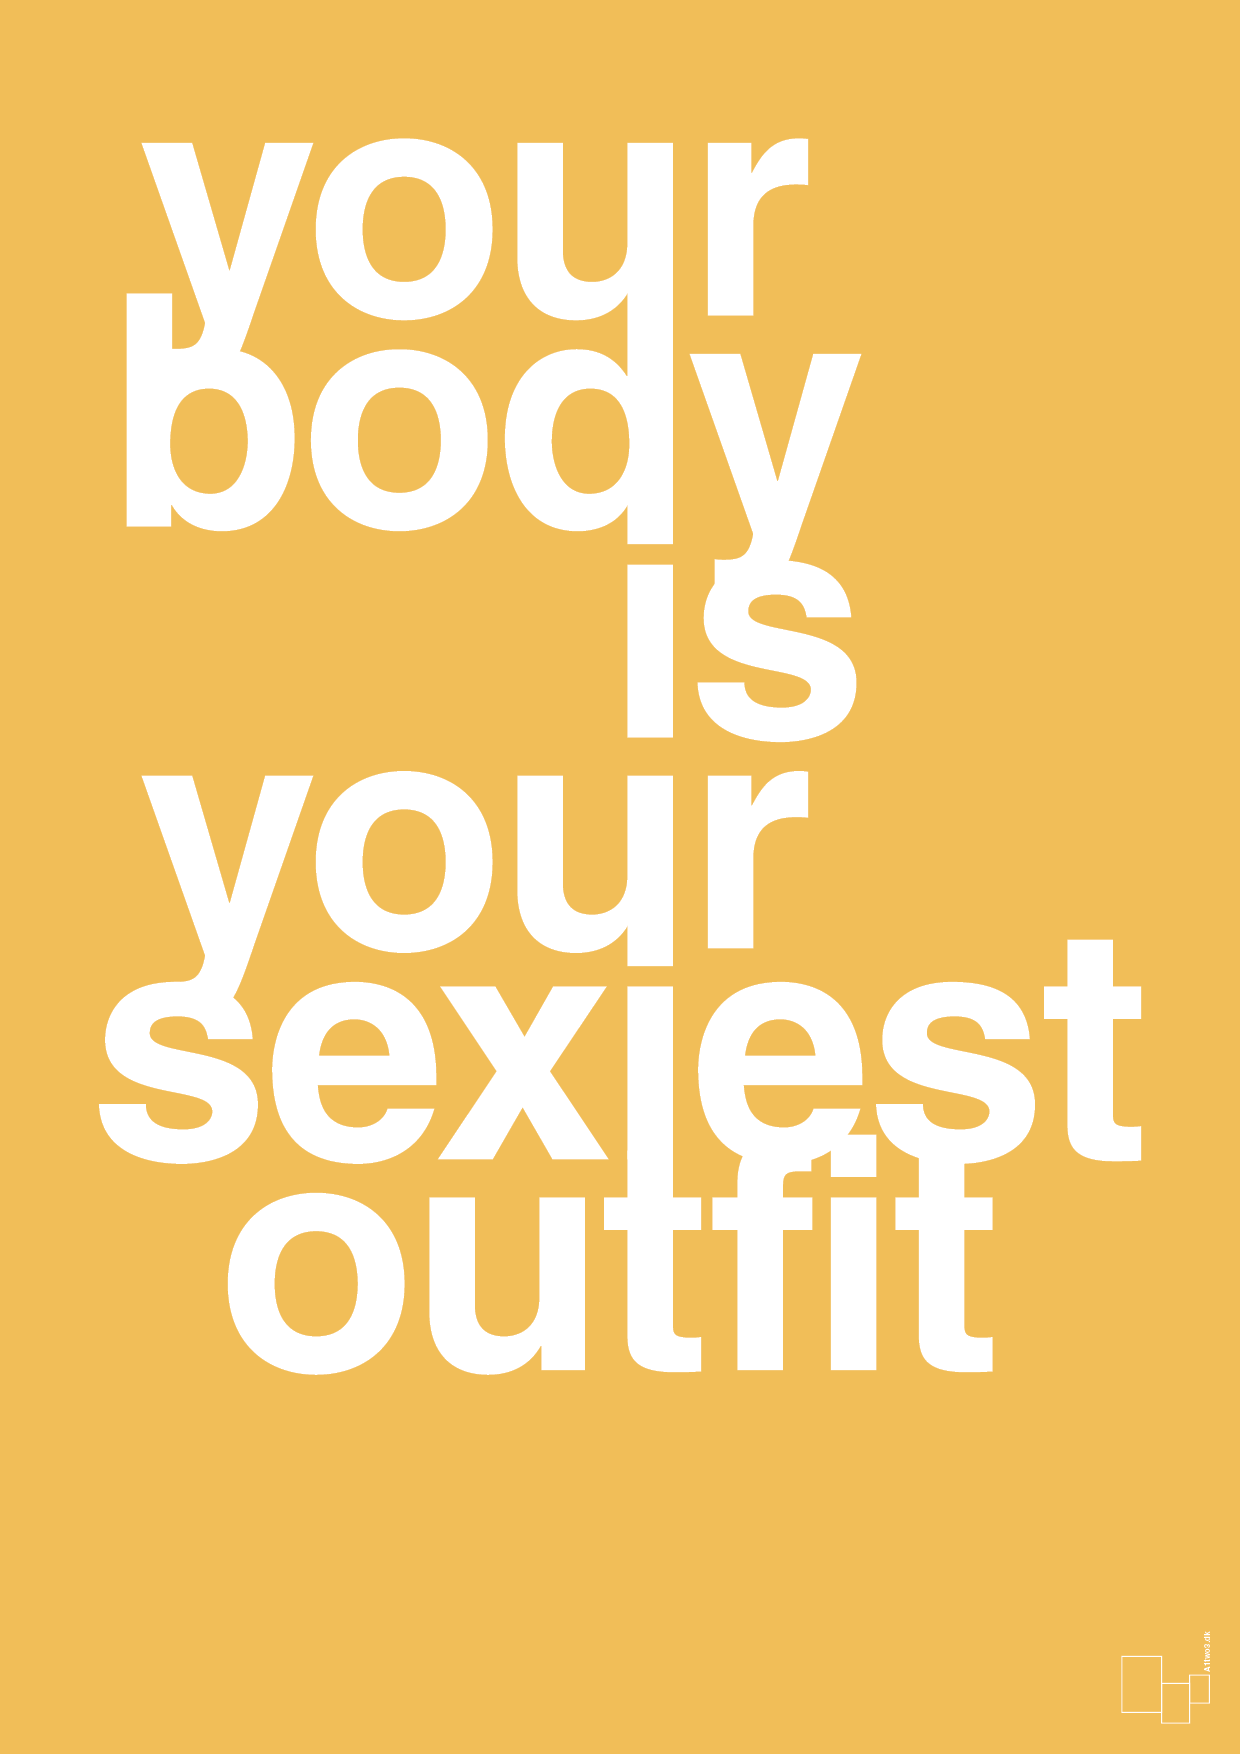 your body is your sexiest outfit - Plakat med Sport & Fritid i Honeycomb